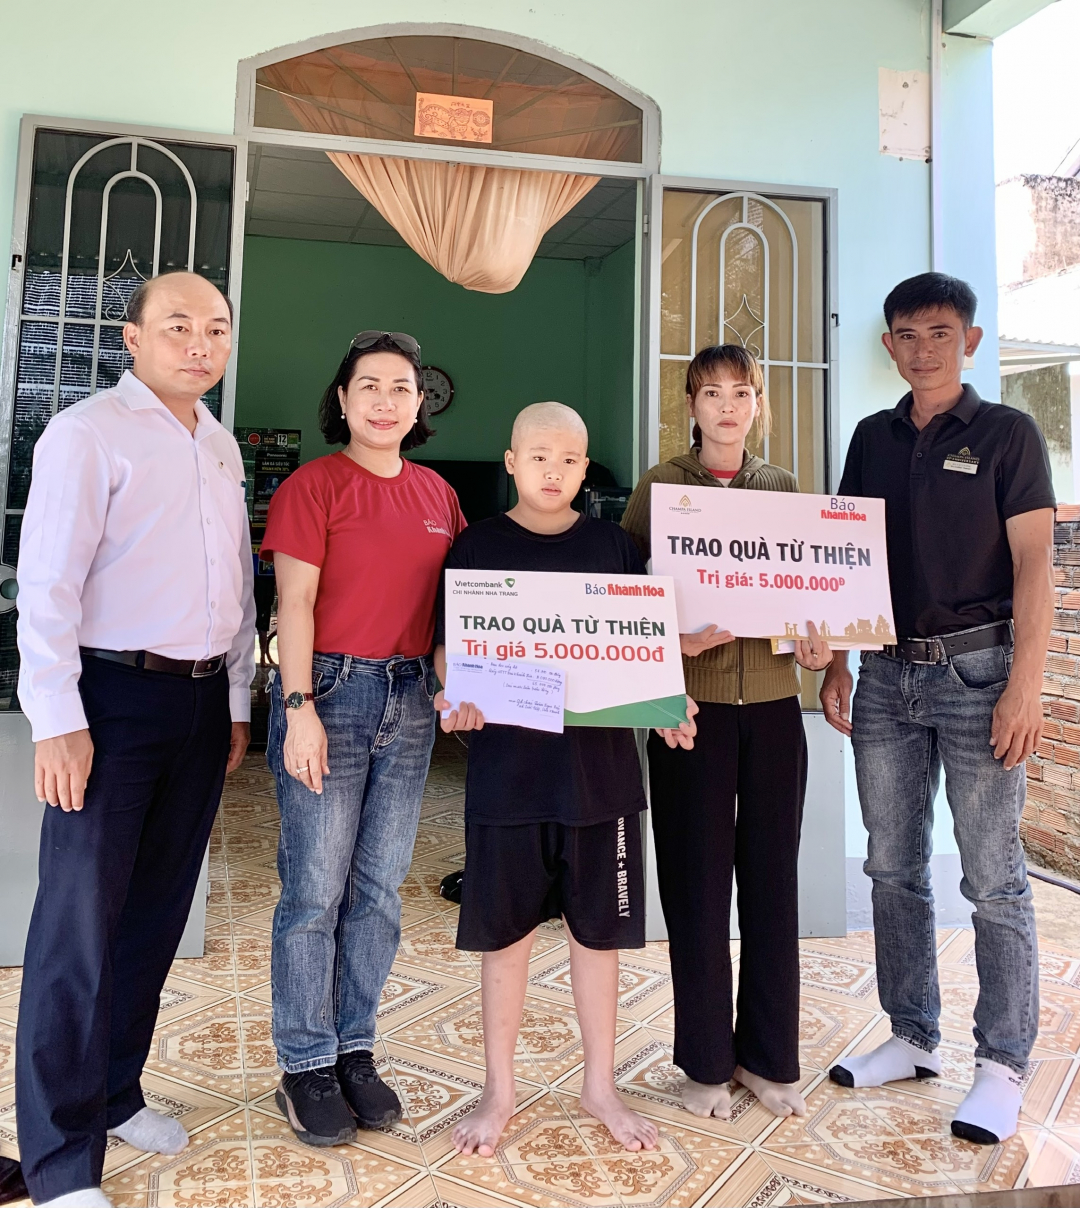 Representatives of Khanh Hoa Newspaper and units offering money to the family of Tran Ngoc Bao

